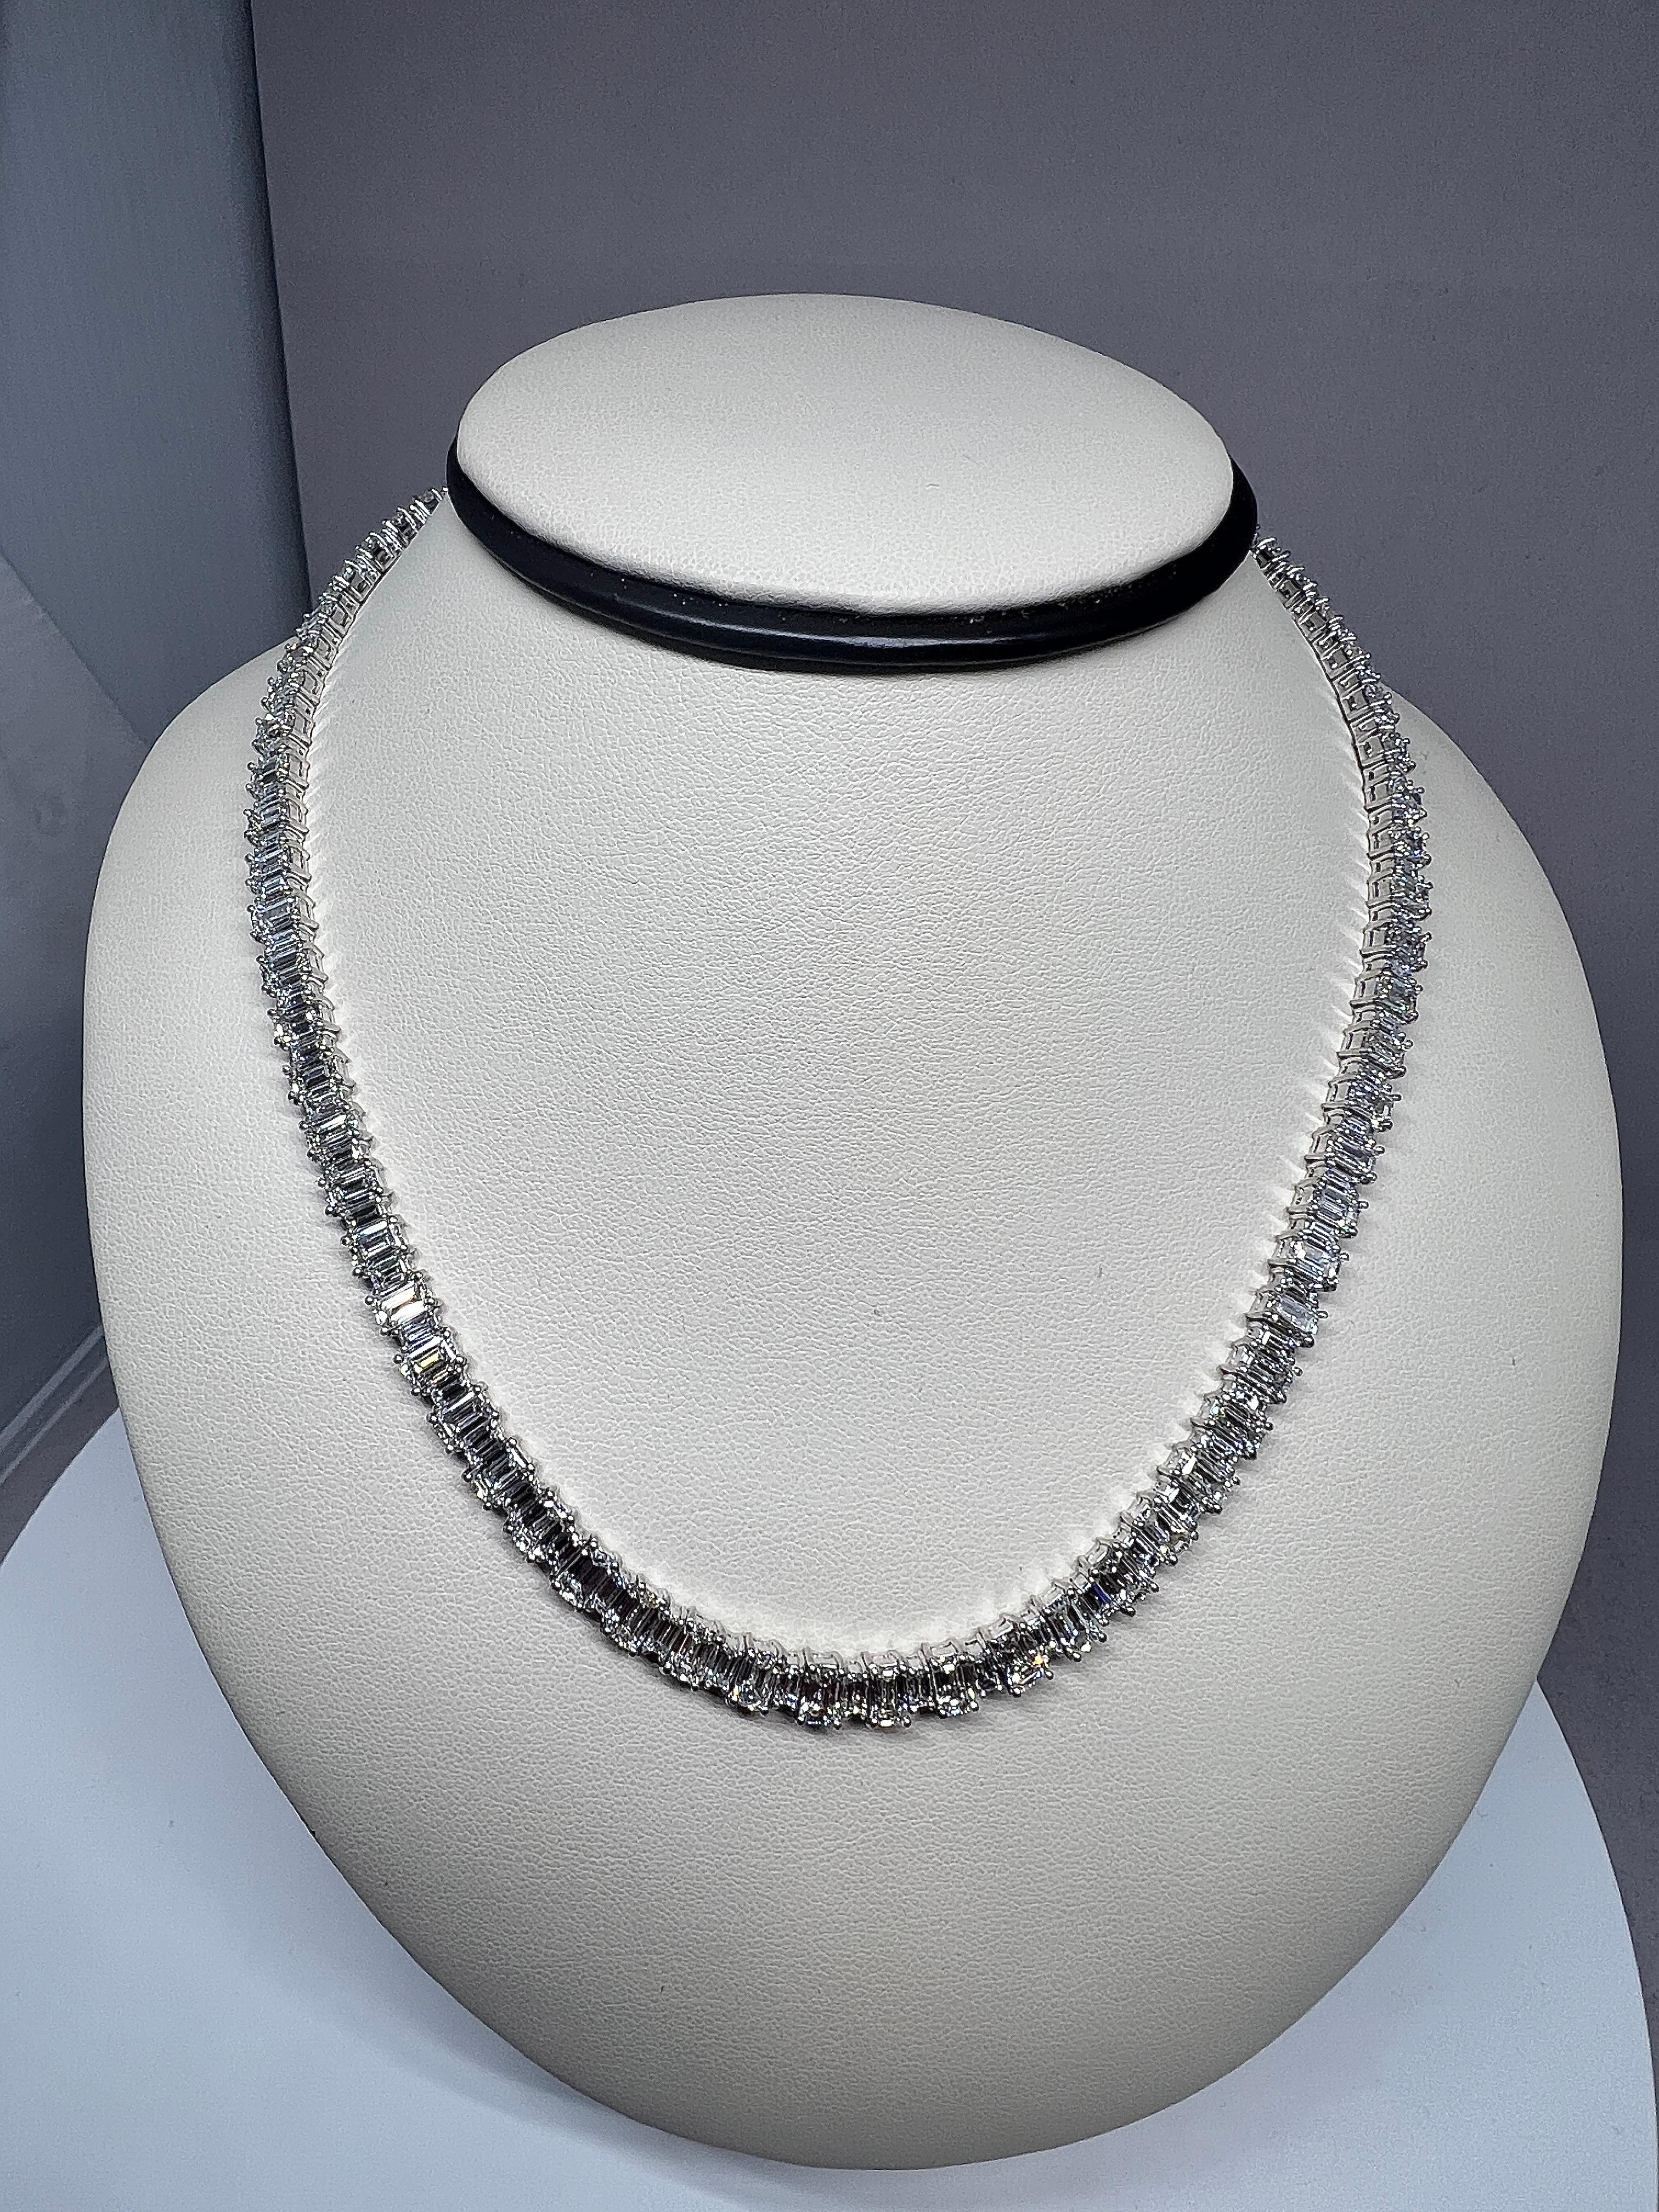 Stunning handmade emerald cut & baguette cut diamond necklace. The necklace features 31.84 cts of diamonds graded G-H in color and VS1-VS2 in clarity set in platinum. The necklace is 16 inches in length and can be extended for a fee.

